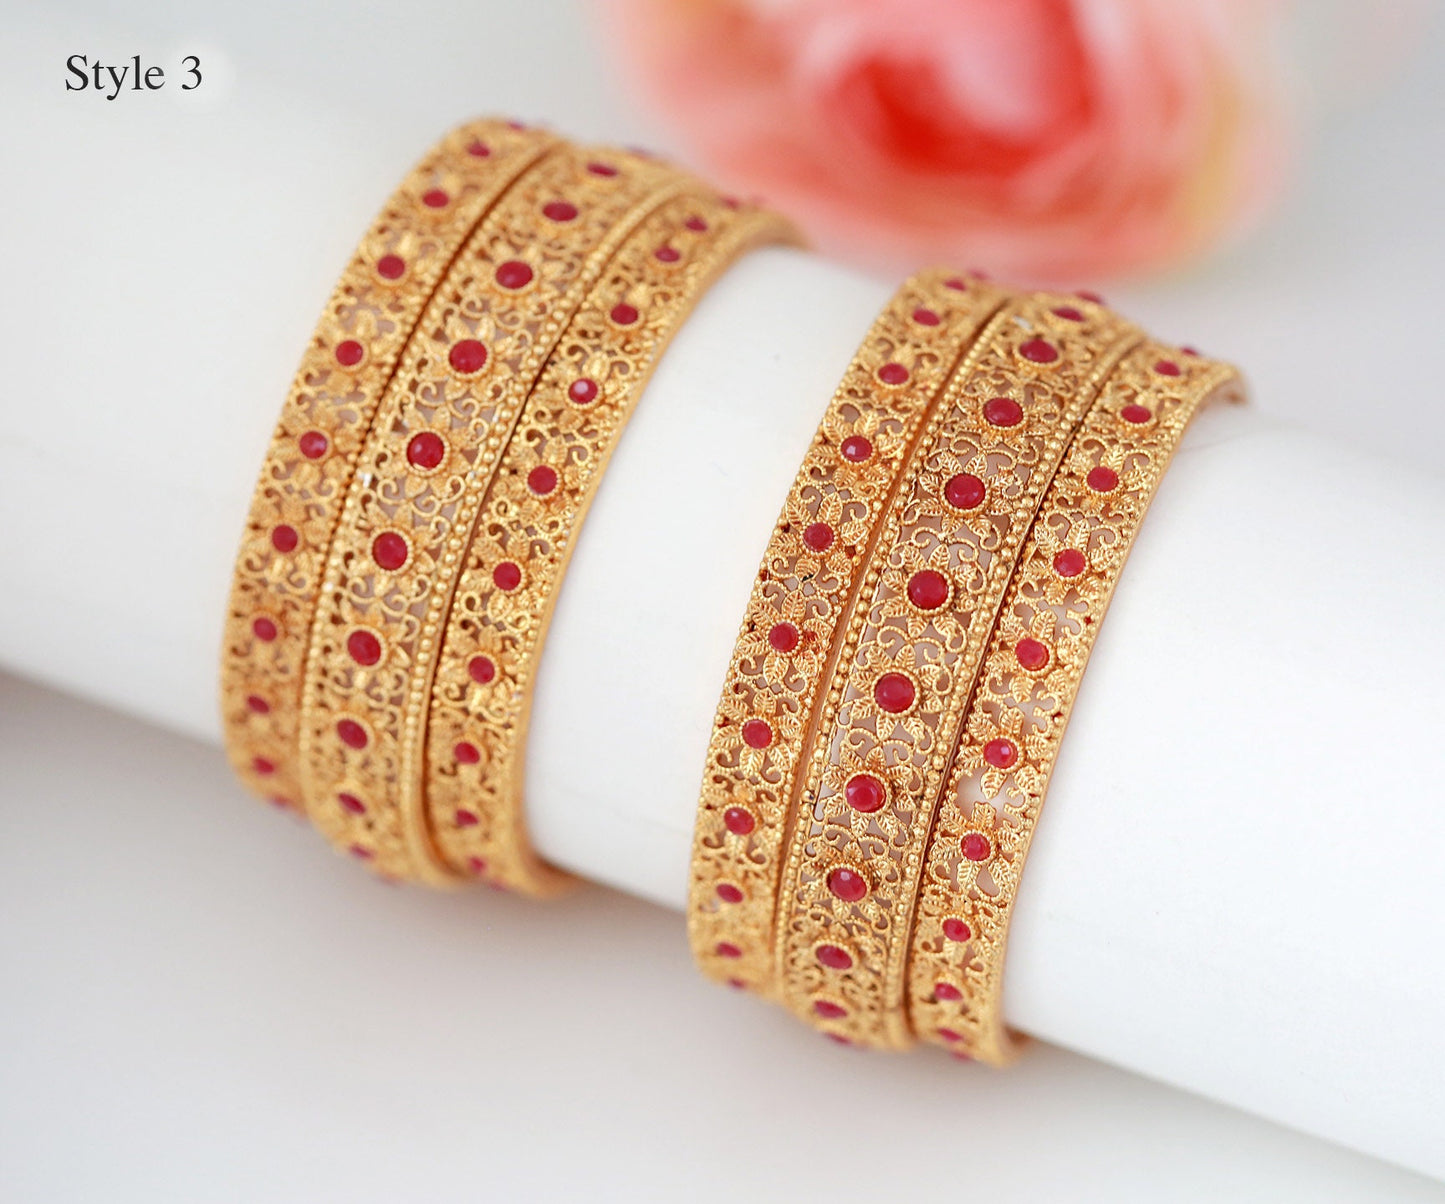 6 Piece of Gold Plated Light Weight Bangles | Traditional Temple Jewelry | Peacock design bangles gold Polish | One gram Gold bridal bangles